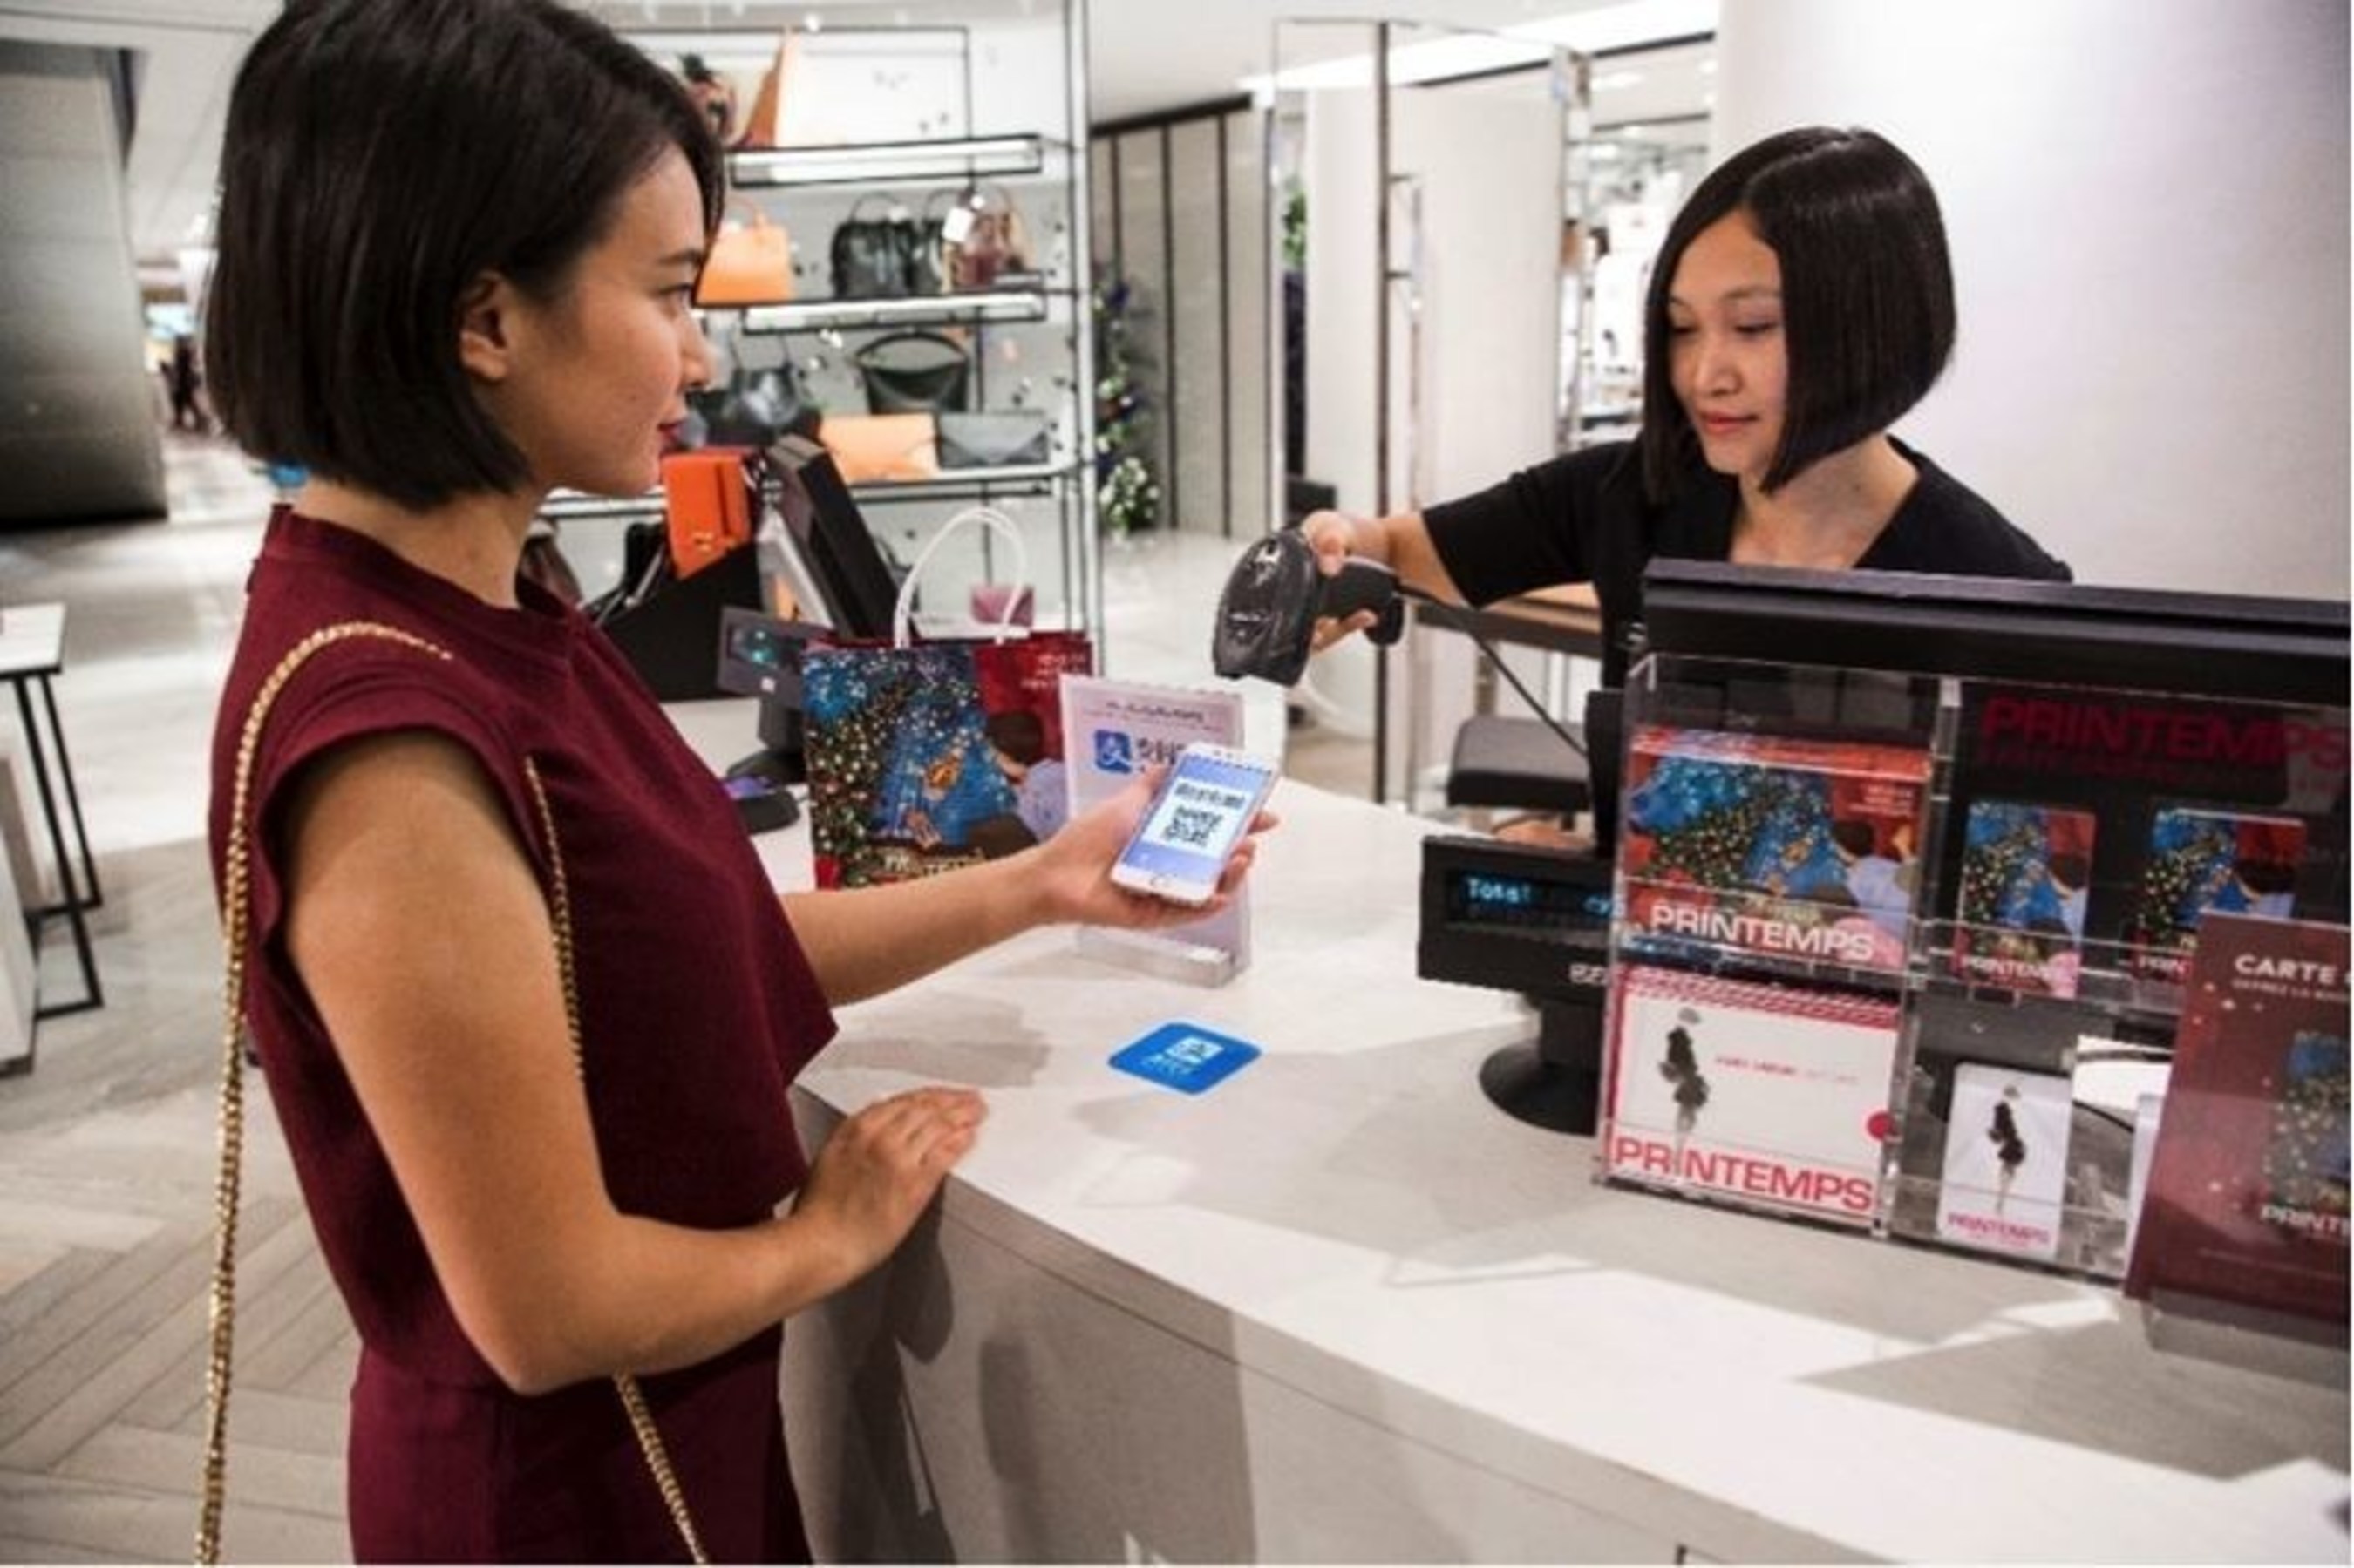 Printemps partners with Wirecard and becomes the first department store in France to accept payments via Alipay. Photographer Paul Blind (PRNewsFoto/Wirecard AG)